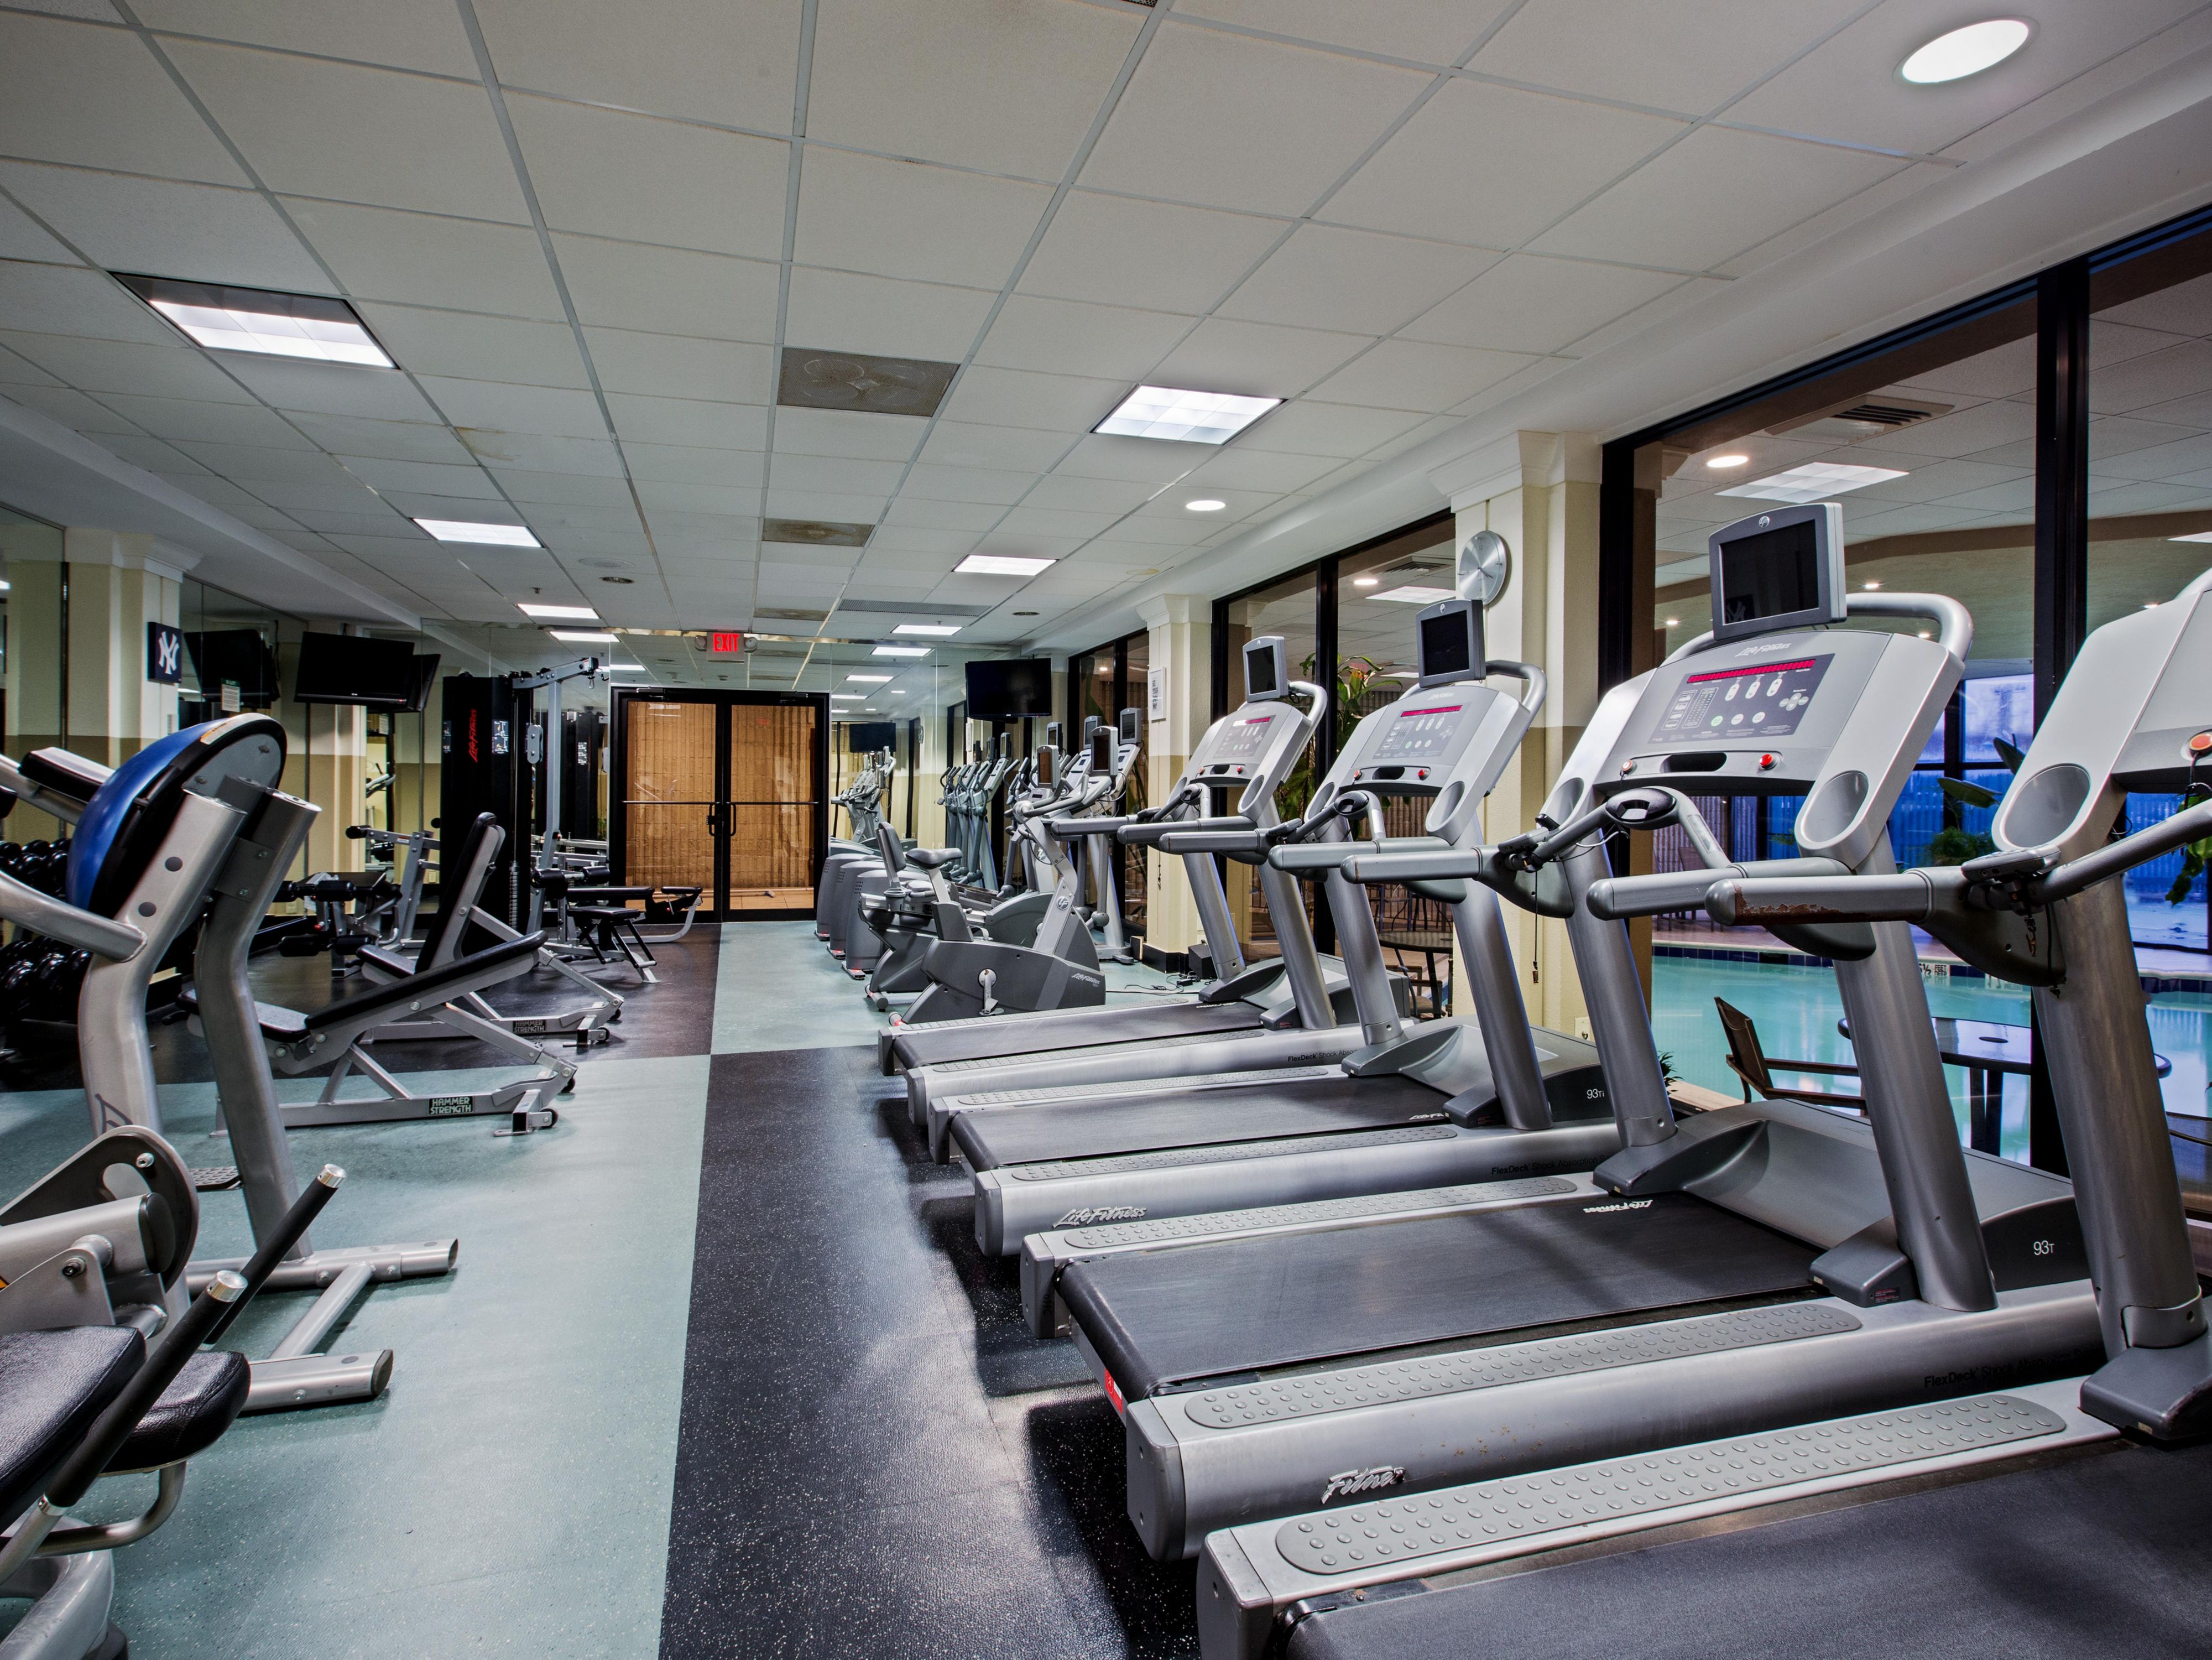 Stay fit, energized, and rejuvenated at our upscale lifestyle hotel in Elizabeth, New Jersey. Kickstart your day with a workout in our cutting-edge 24-hour Fitness Center, complete with cardio and strengthening equipment. At the end of the day, unwind with a refreshing dip in our sparkling indoor pool. 